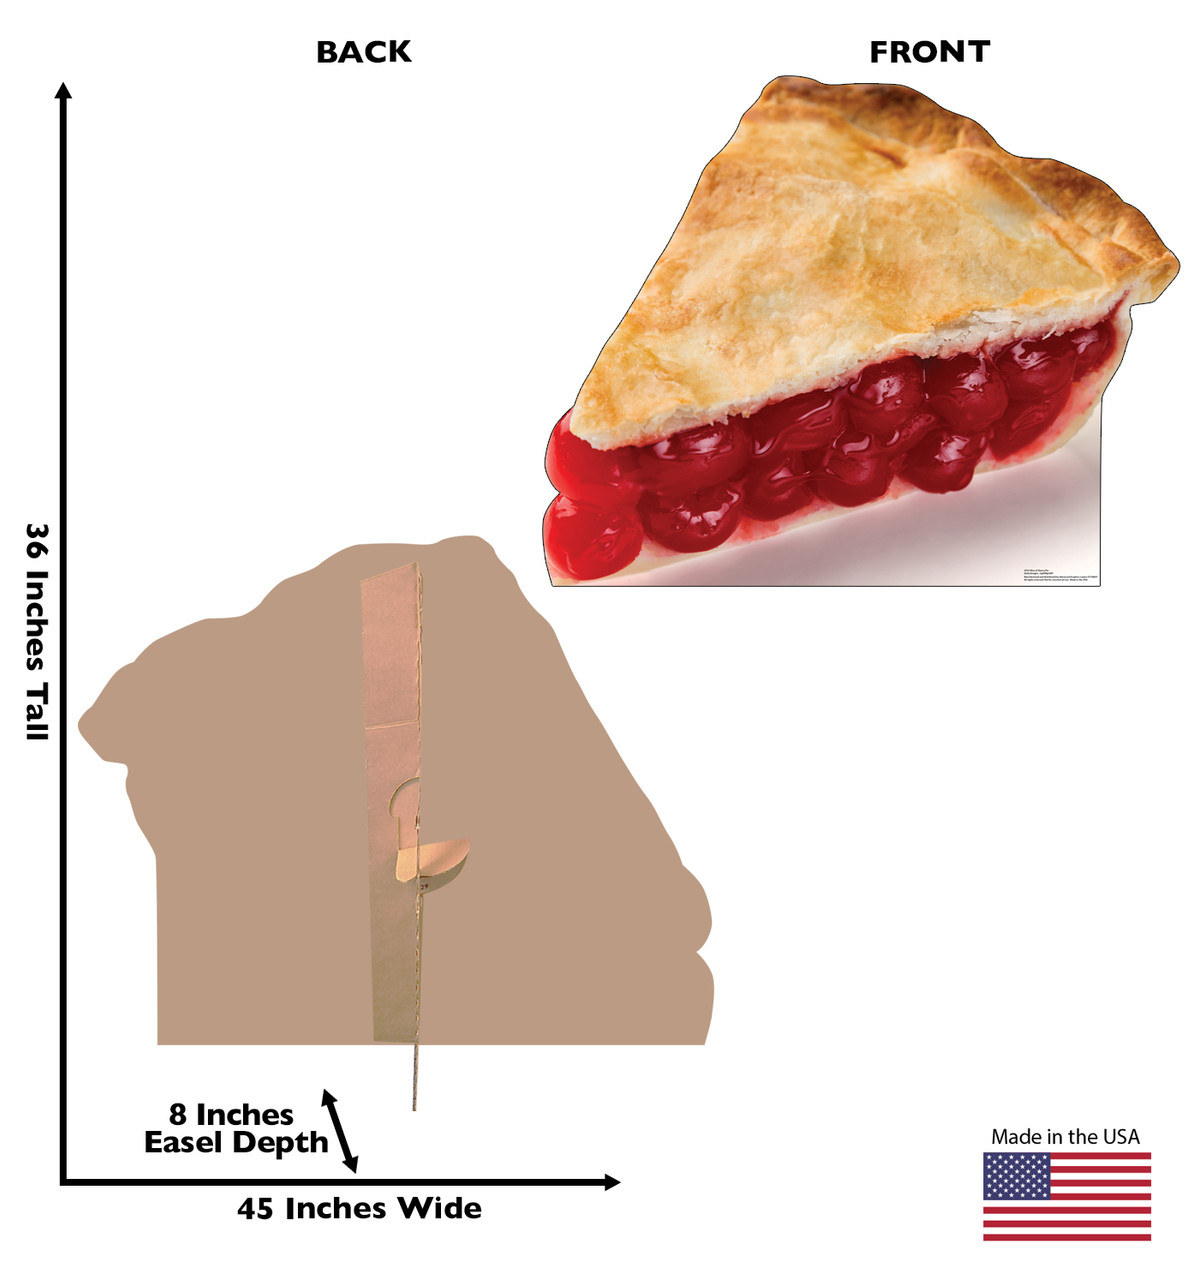 Life-size cardboard standee of a Slice of Cherry Pie Front and Back View